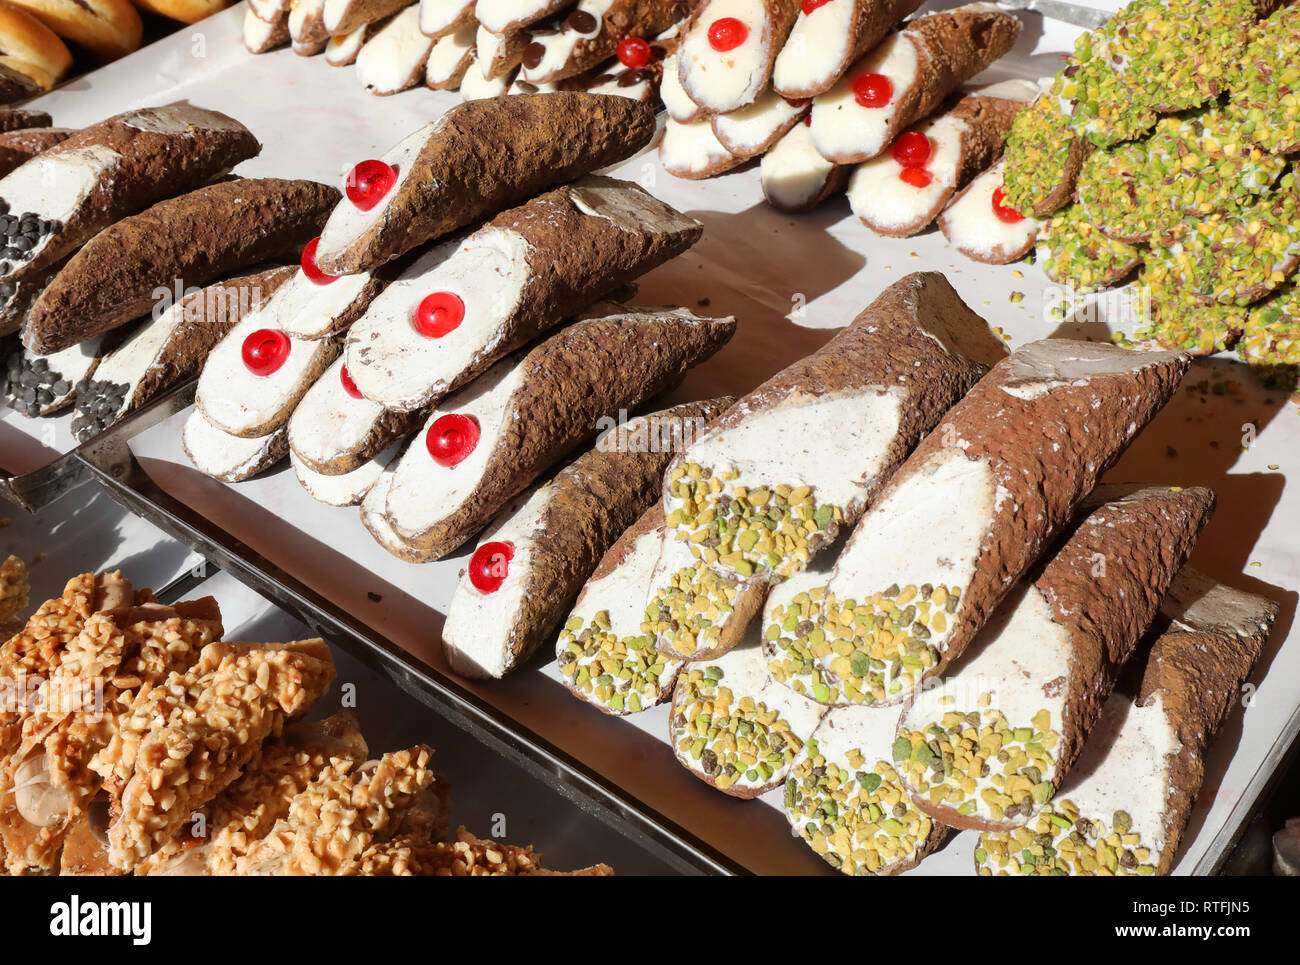 pastries with pistachio and cherry for sale in the pastry stand called Cannolo Siciliano in italian language Stock Photo